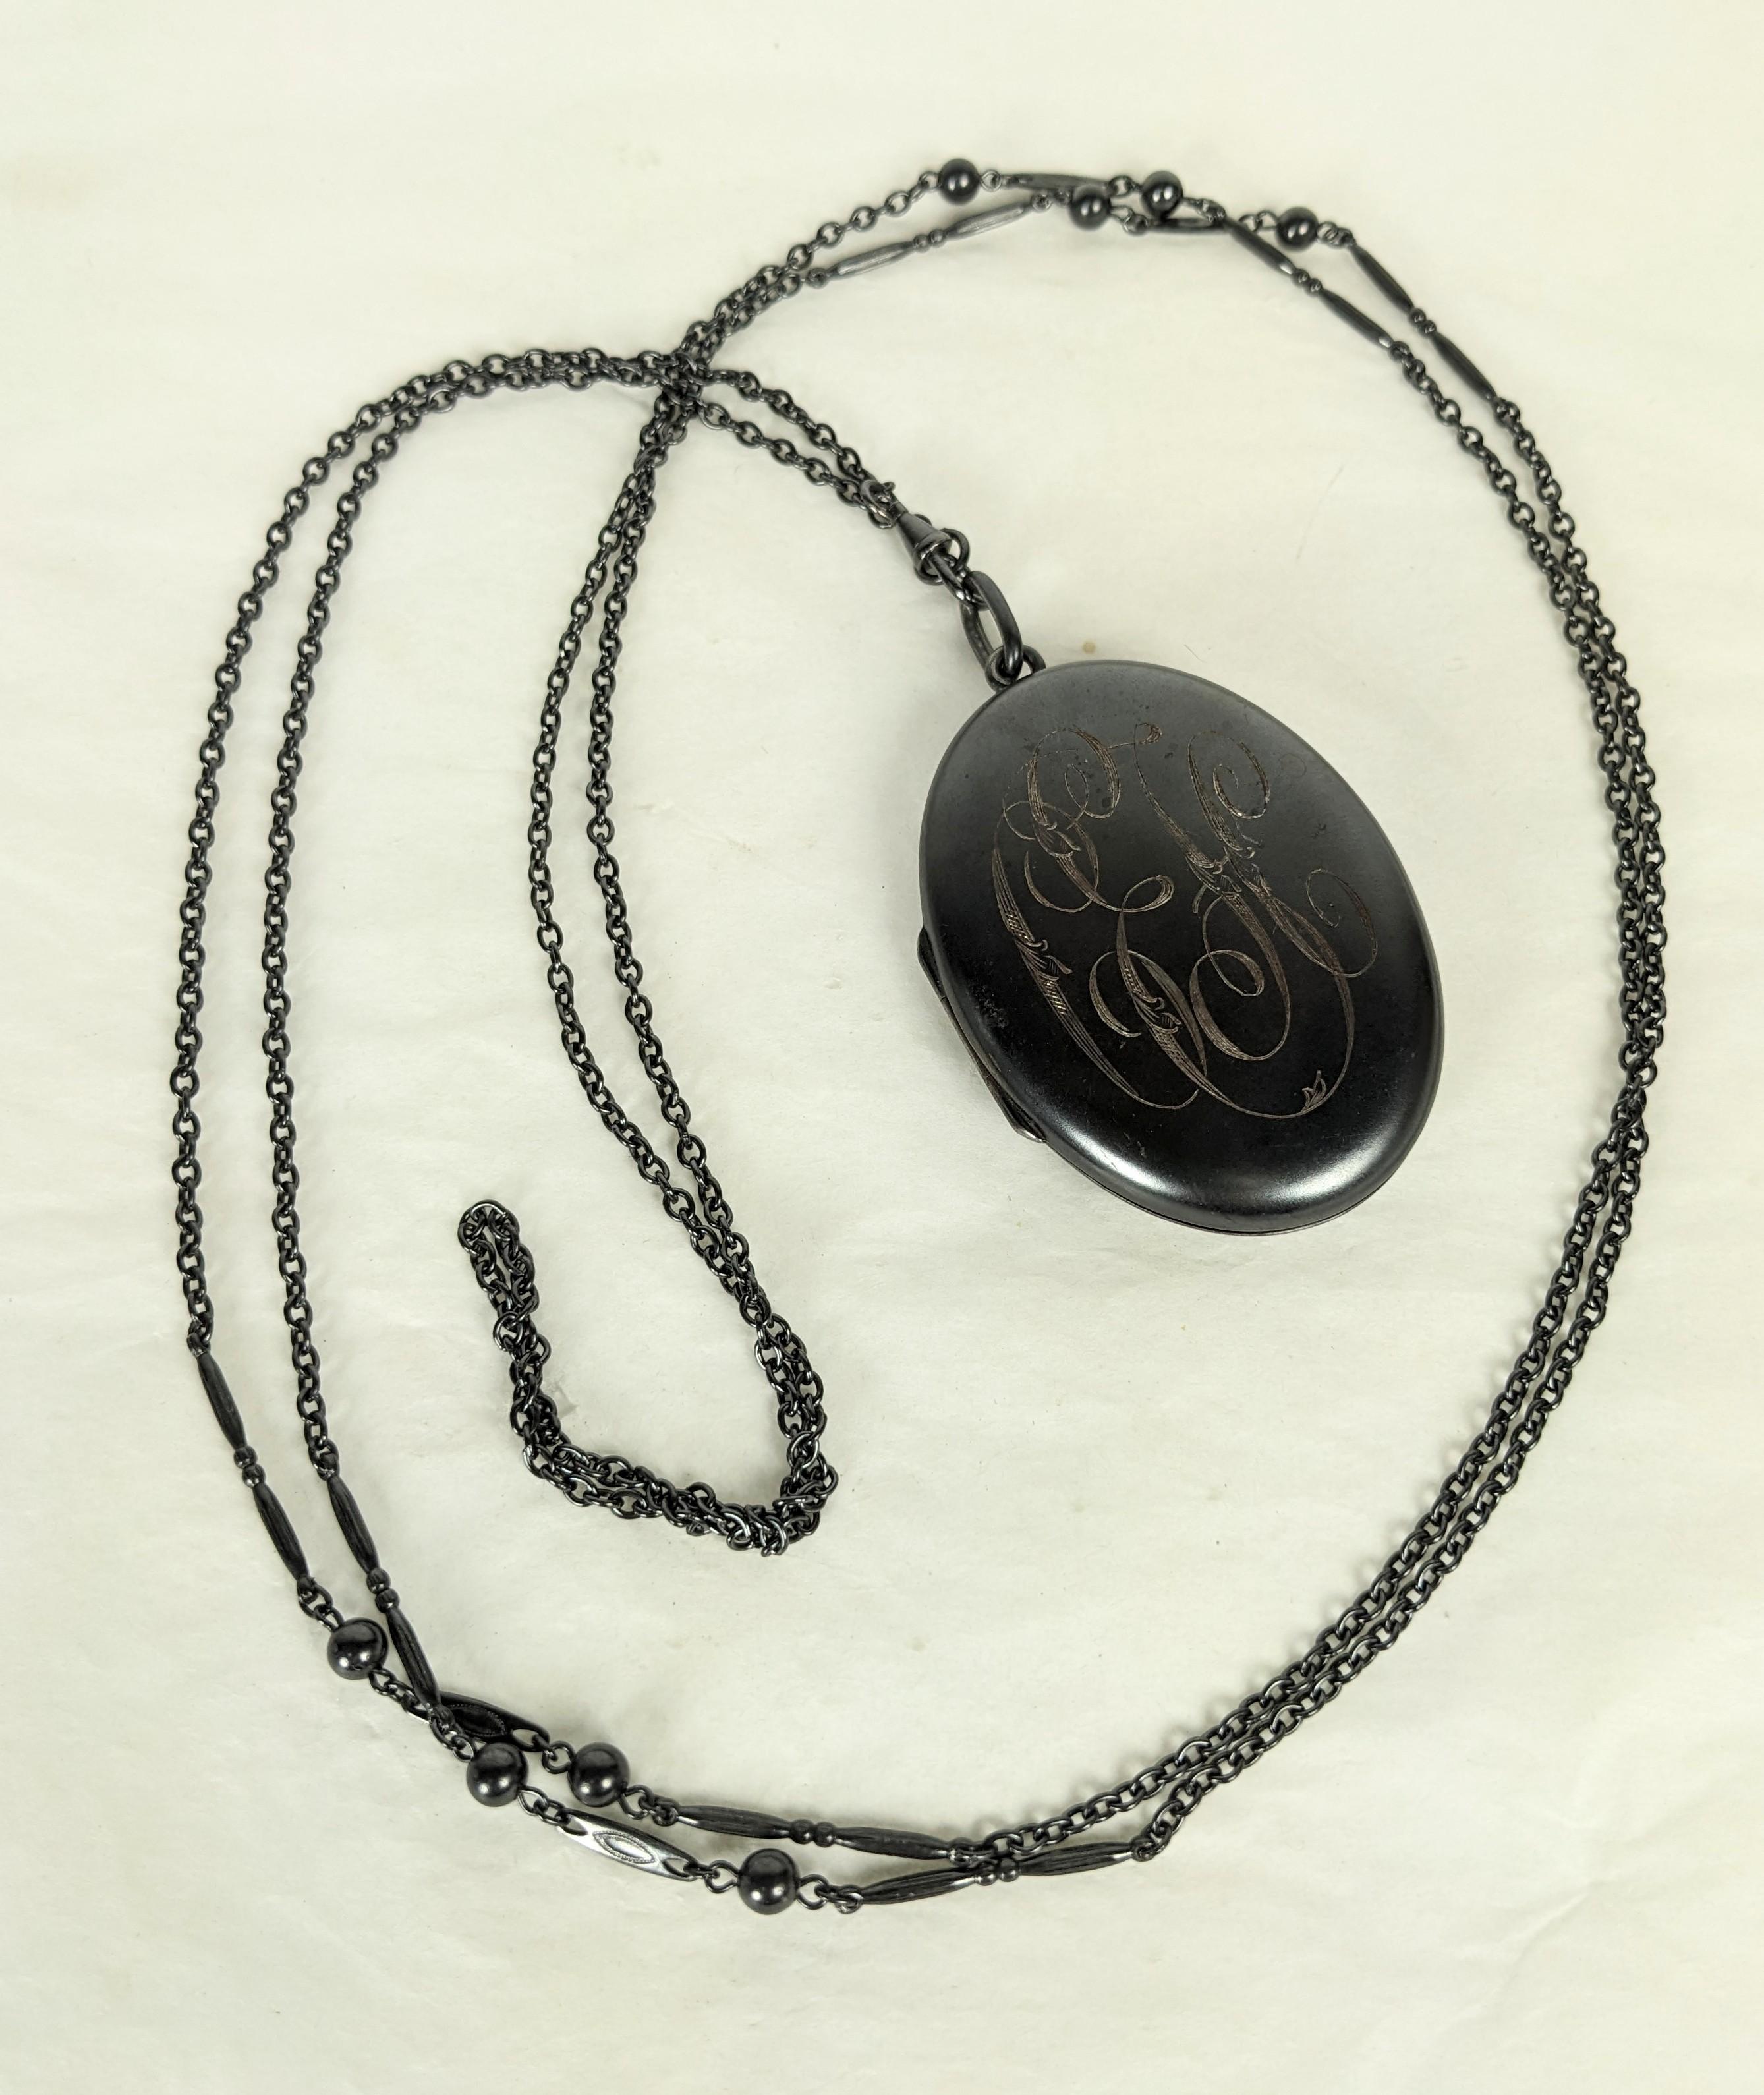 Lovely Victorian Gunmetal Locket and Long Chain from the late 19th Century. Original long chain interspersed with bar and bead sections. Original gunmetal hook and fittings. Large locket has scrolled engraving, hard to decipher with possibly 